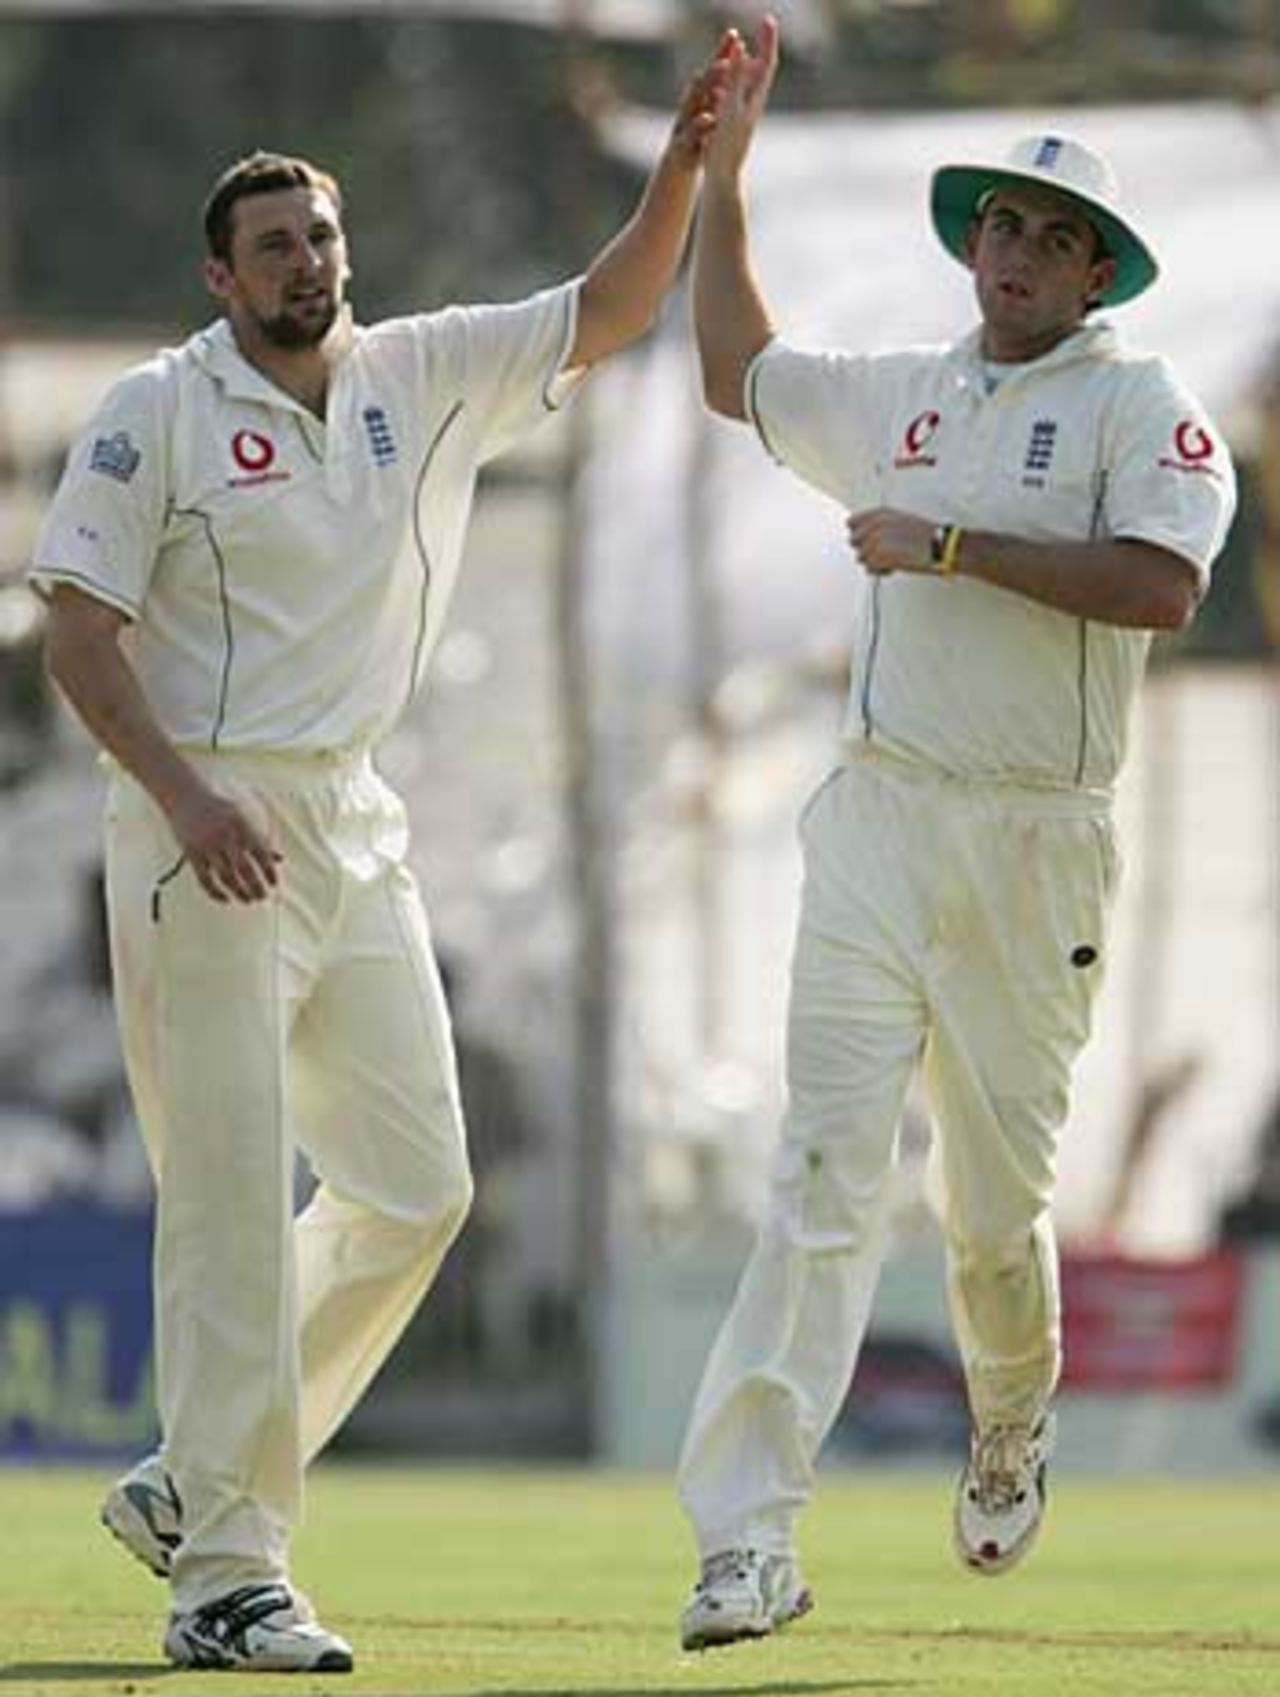 Steve Harmison and Liam Plunkett celebrate a wicket, Indian Board President's XI v England XI, Tour game, Vadodara, 2nd day, February 24, 2006